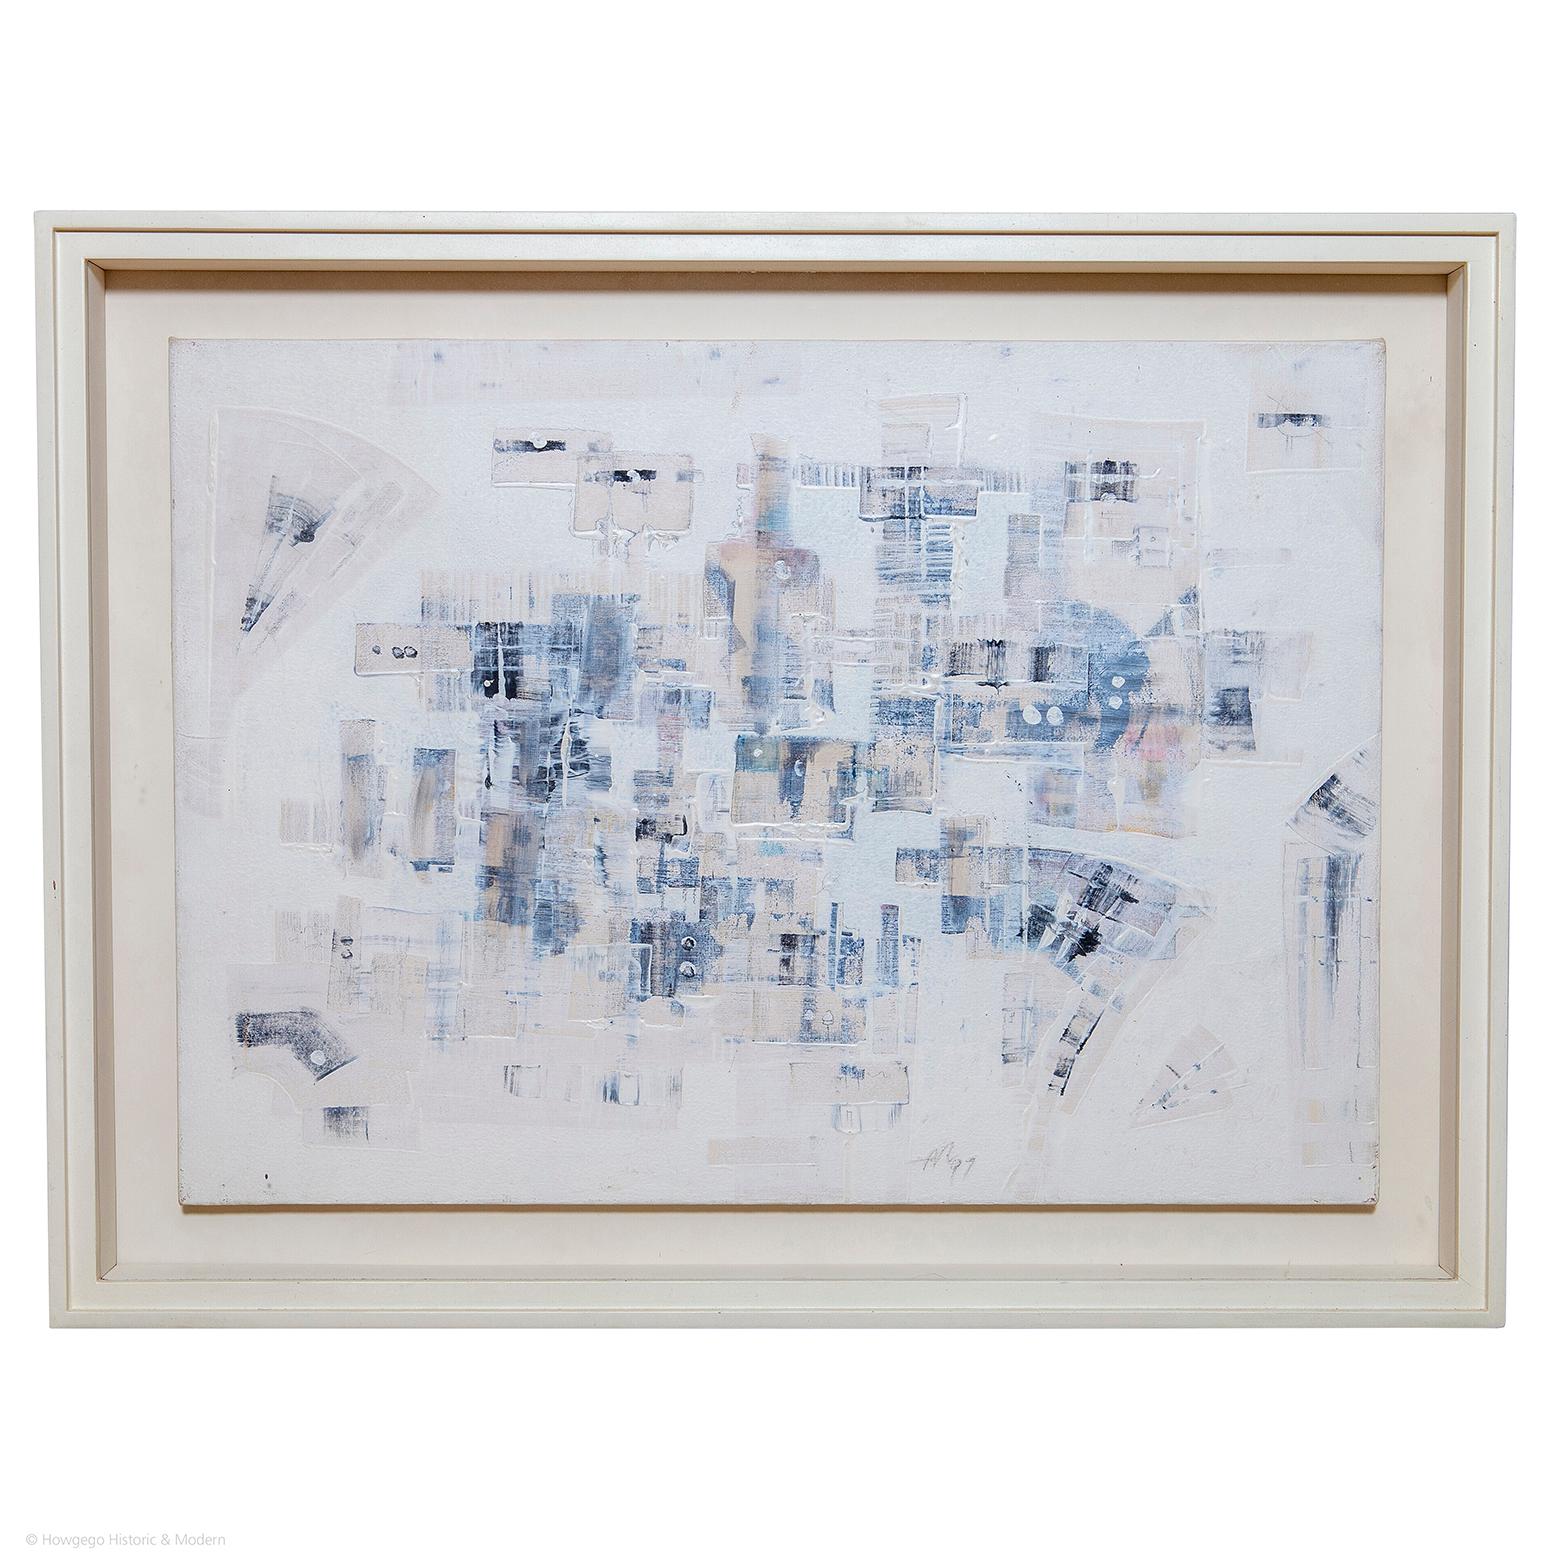 Winter White Diffusion: Abstract, Mixed Media on Canvas, Artist Unknown, Monagram M & Dated 97 lower right

This exciting composition explores diffusion and possibilities within white using colour, texture and medium.  The artist has created an